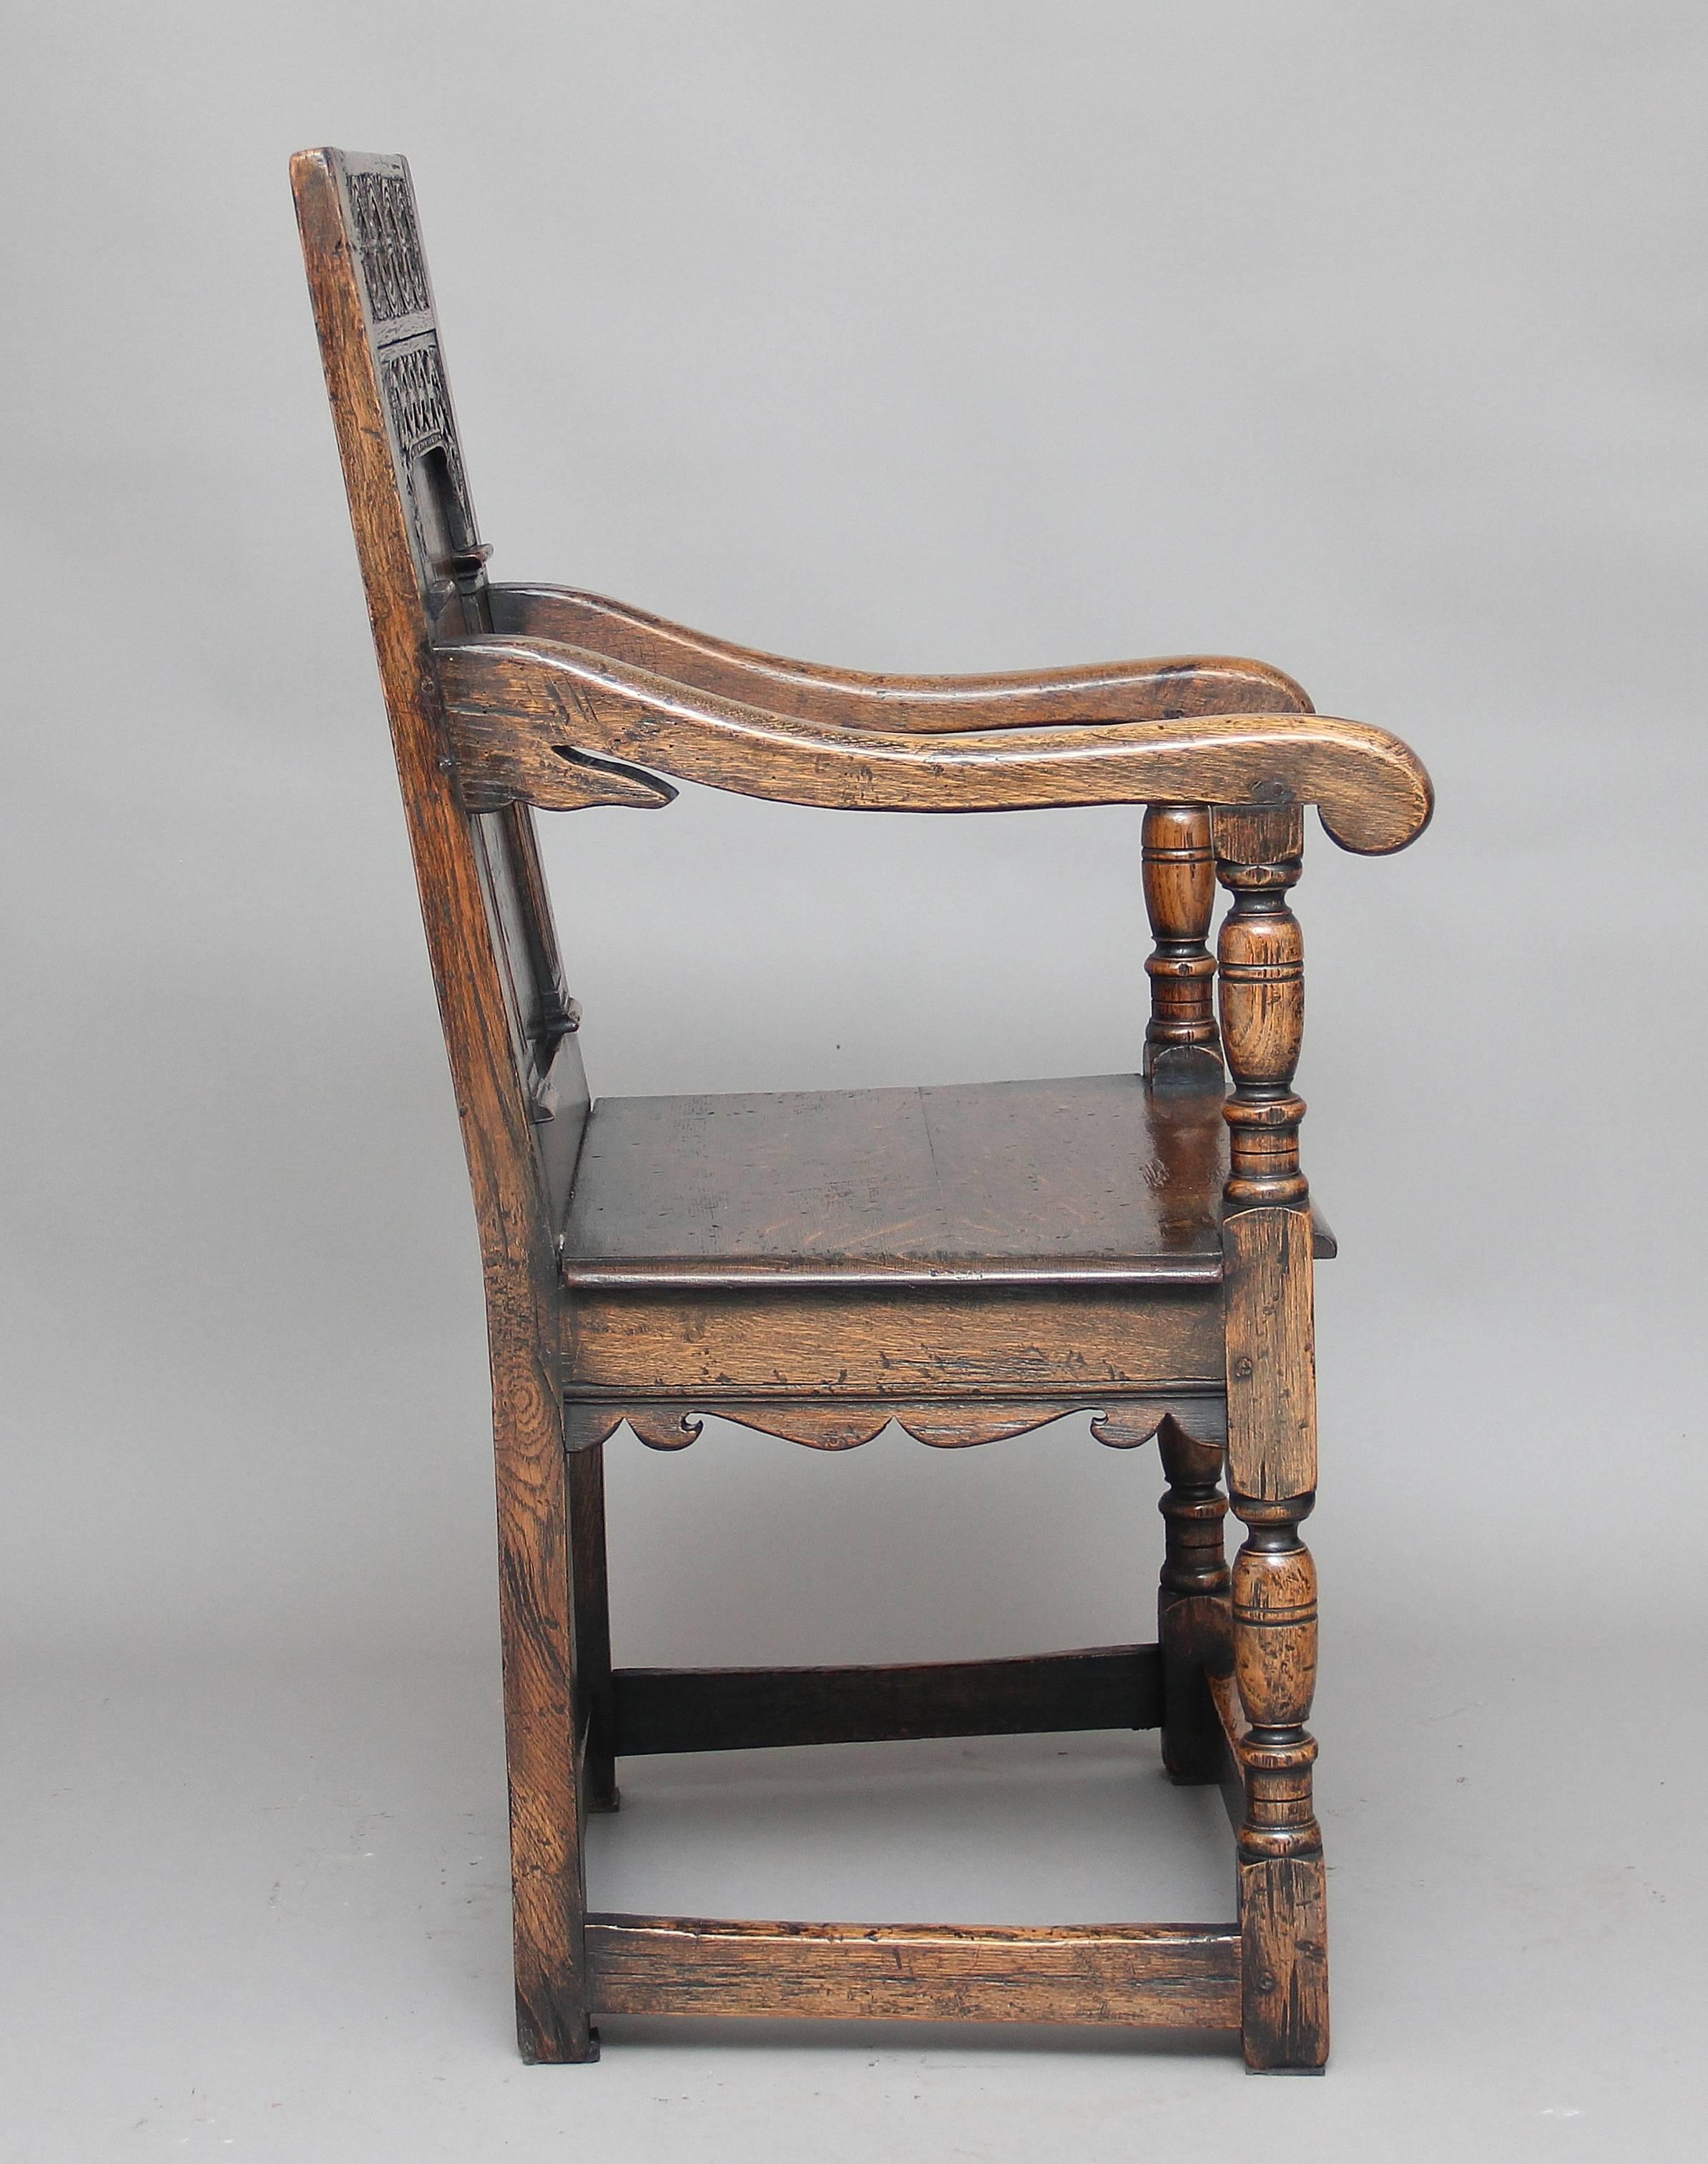 Early 20th century oak wainscot chair in the Tudor style, the back carved with the Tudor rose and a fluted and carved arch with a square and diamond marquetry inlay in the panel, the turned front legs holding nice swept bold arms, the legs united at